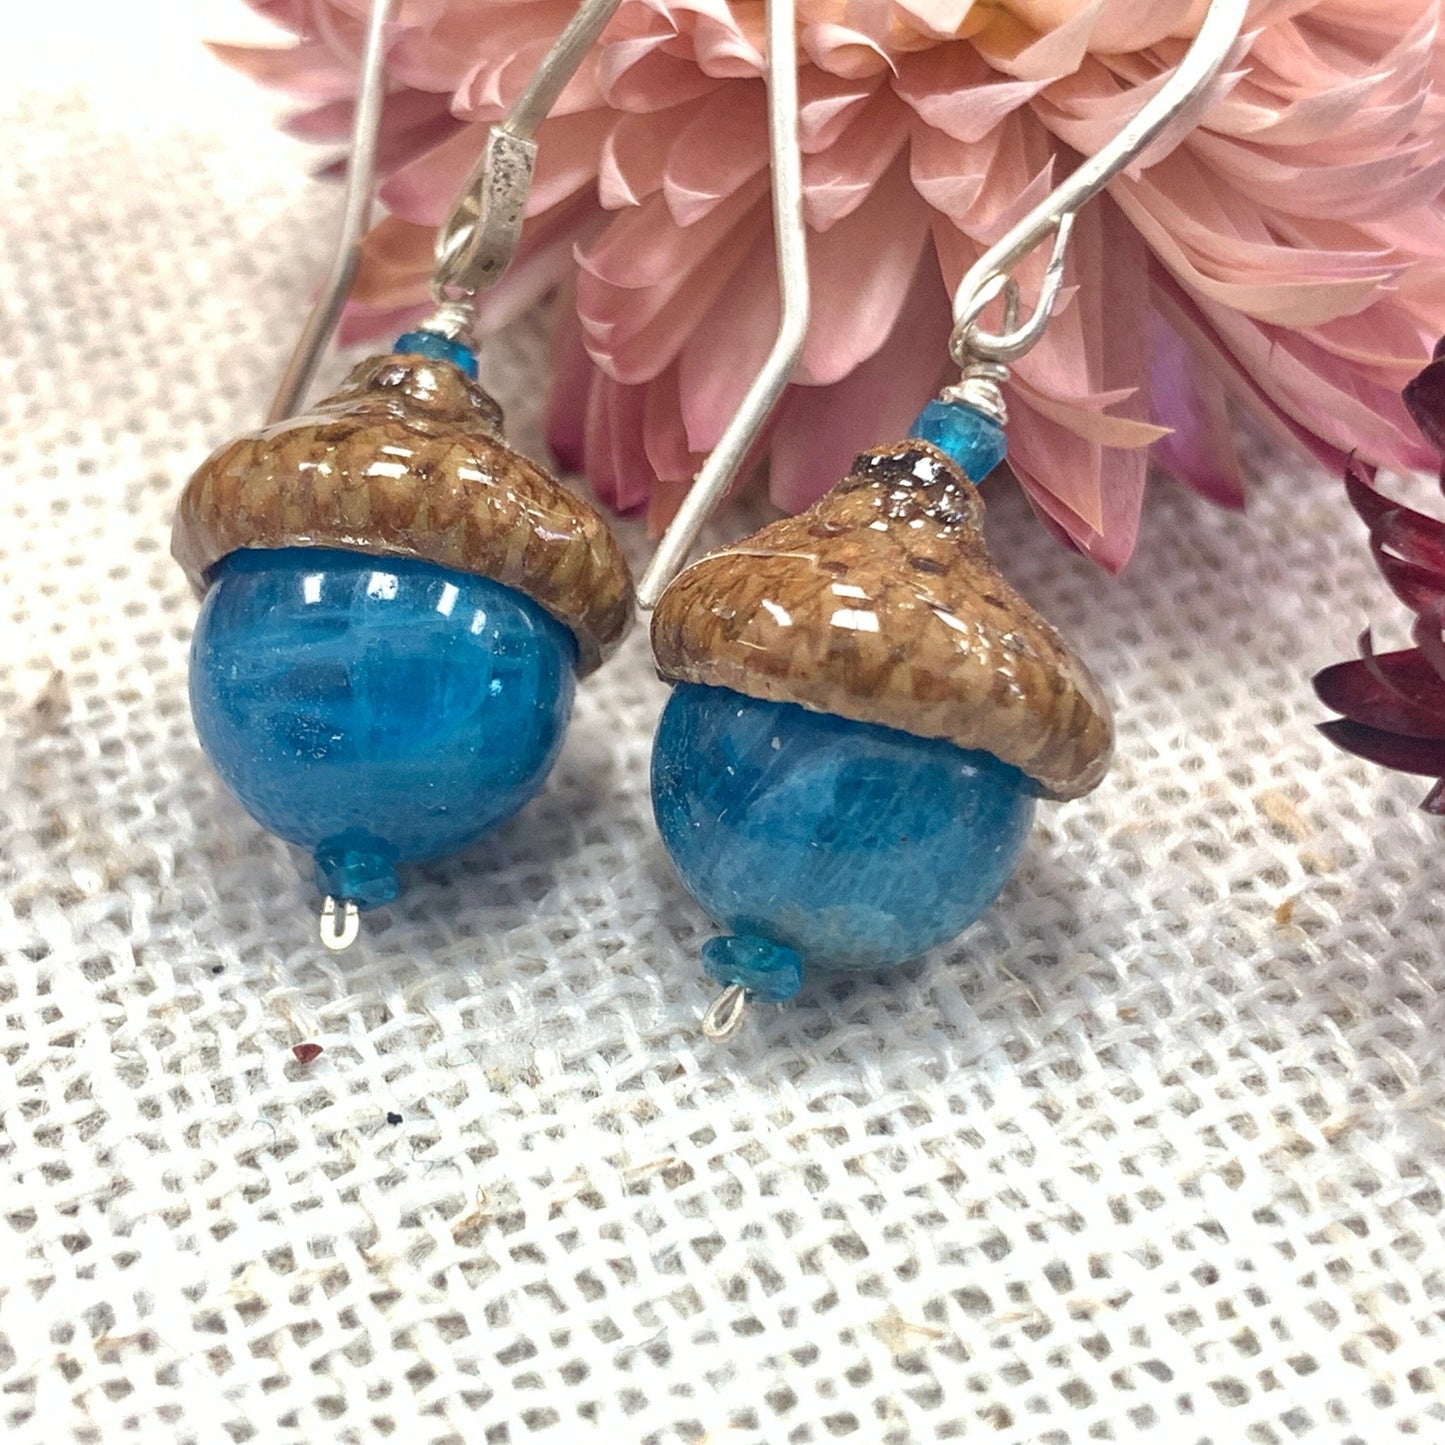 Teal Apatite Fairie Earrings w/ Acorn Caps in Silver - Coral and Vine Co